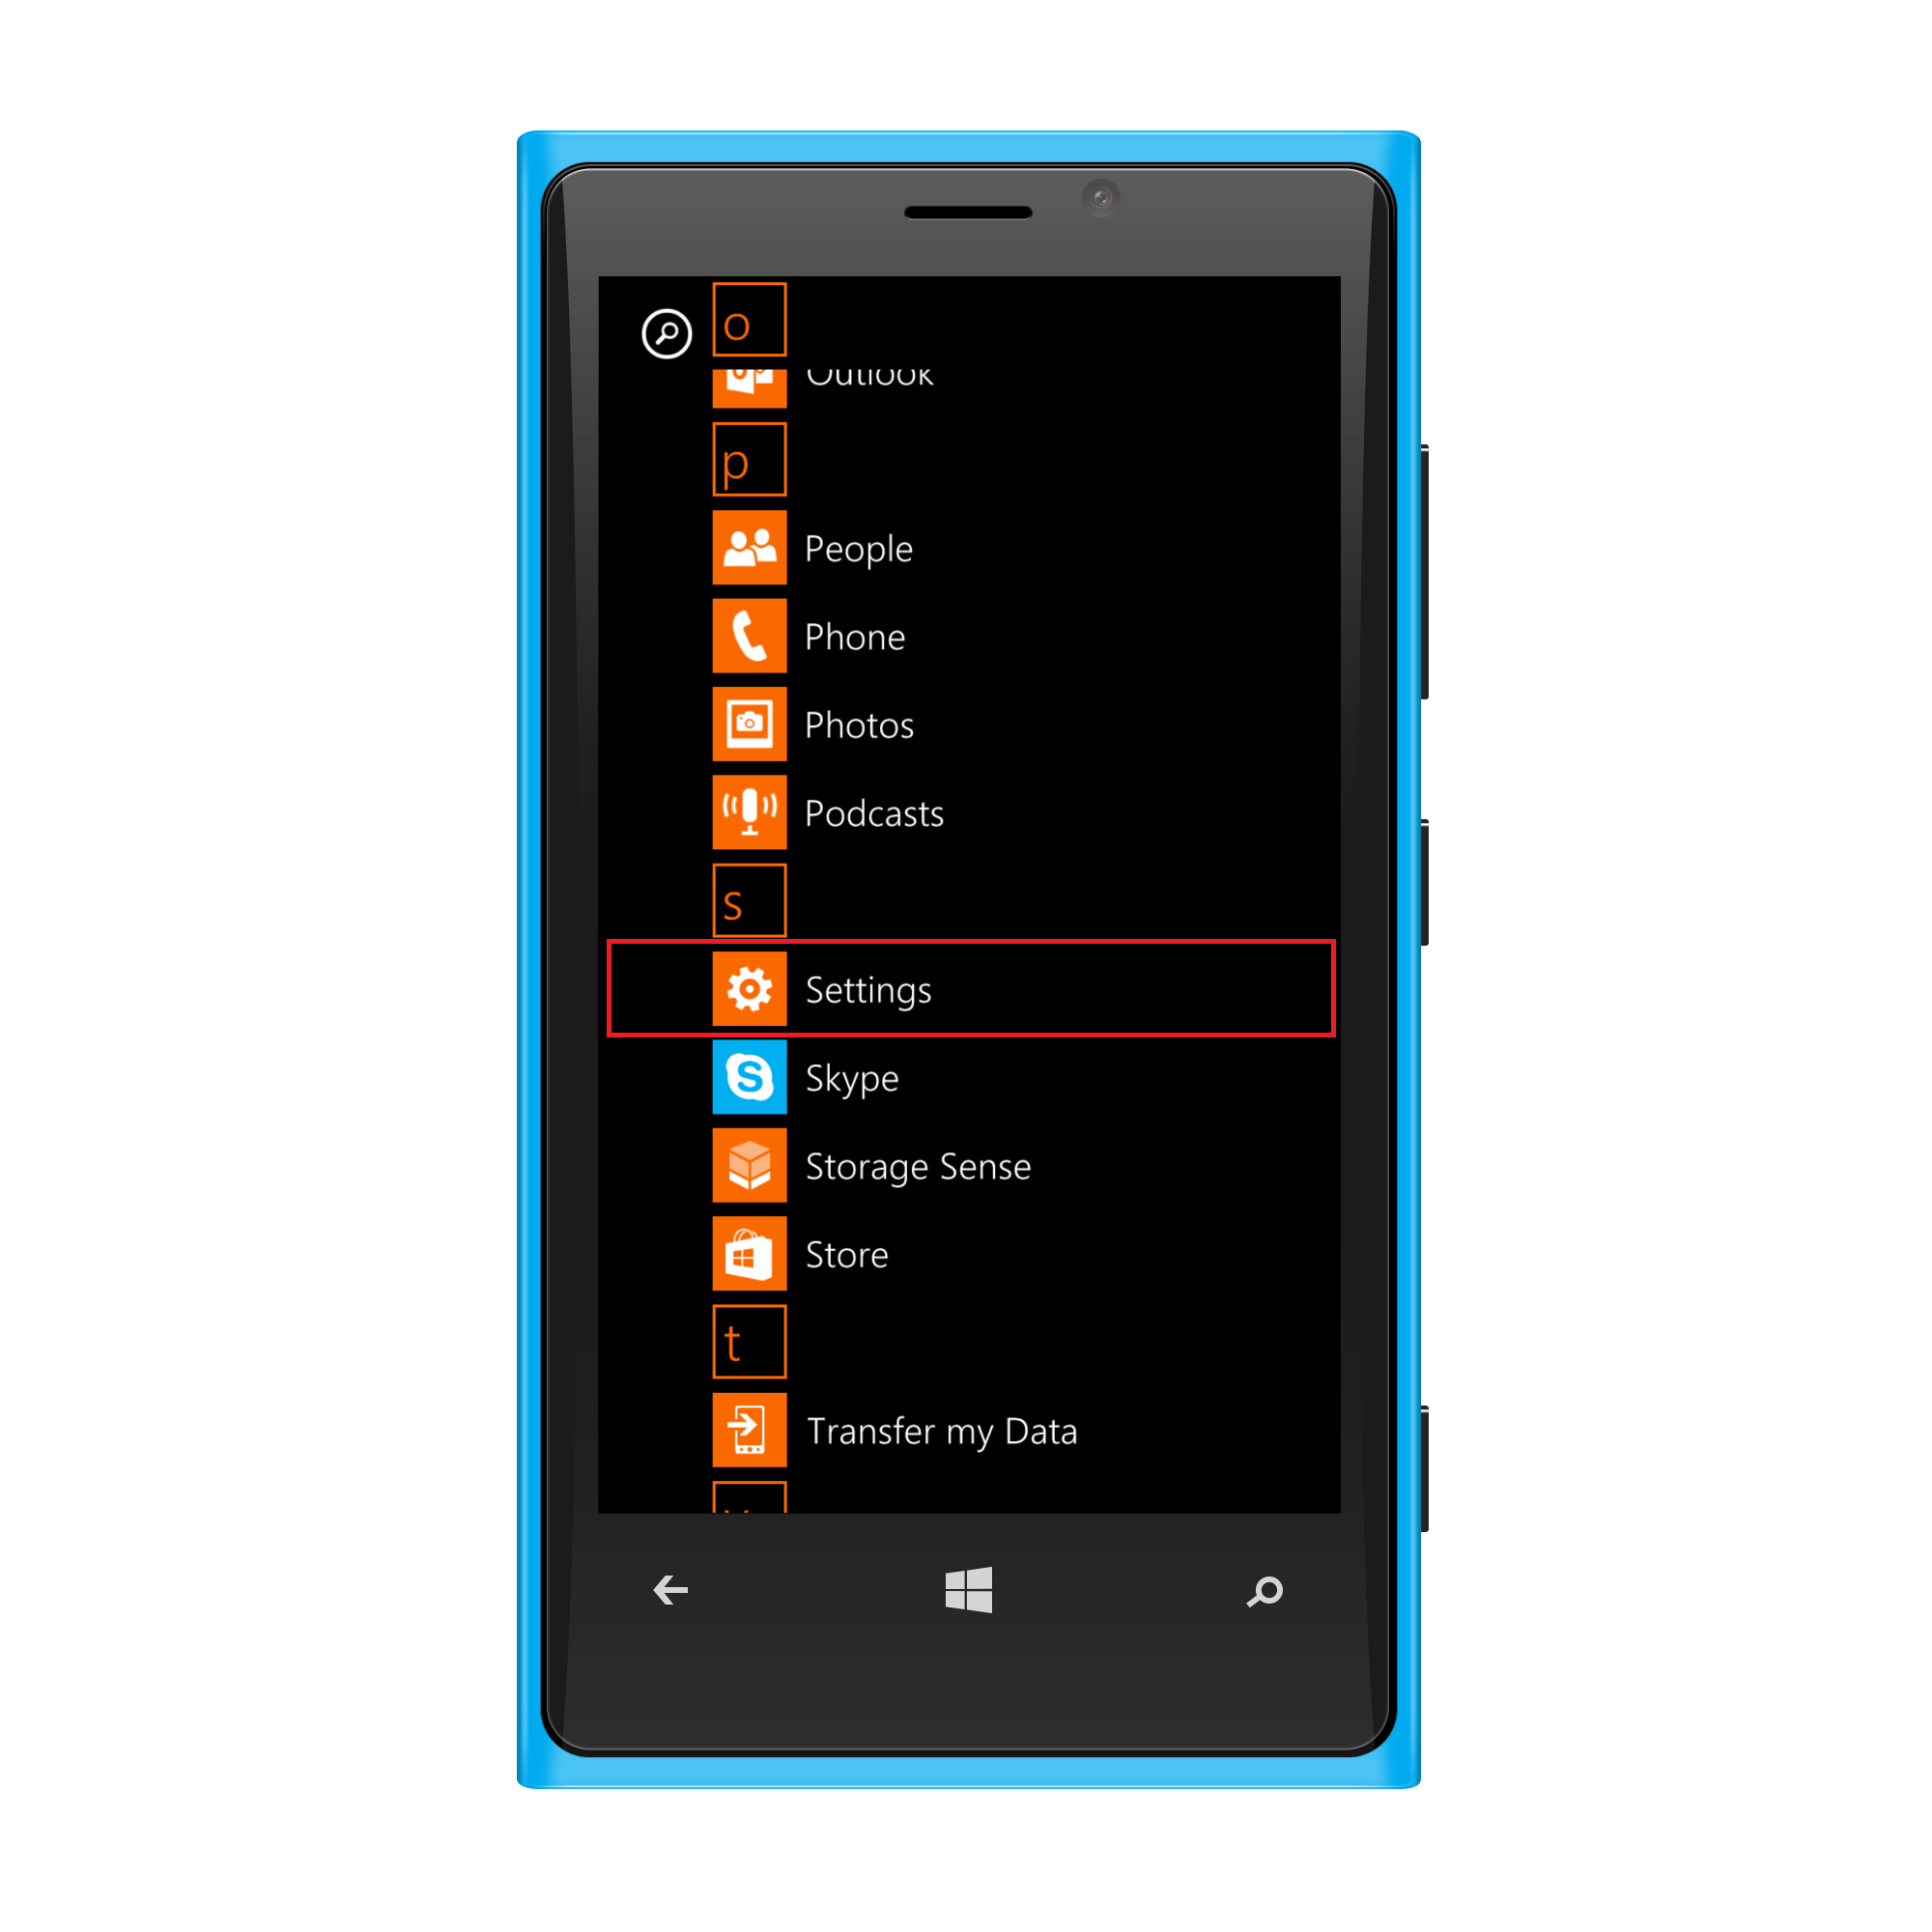 Settings to enable Geotracking on Windows phone